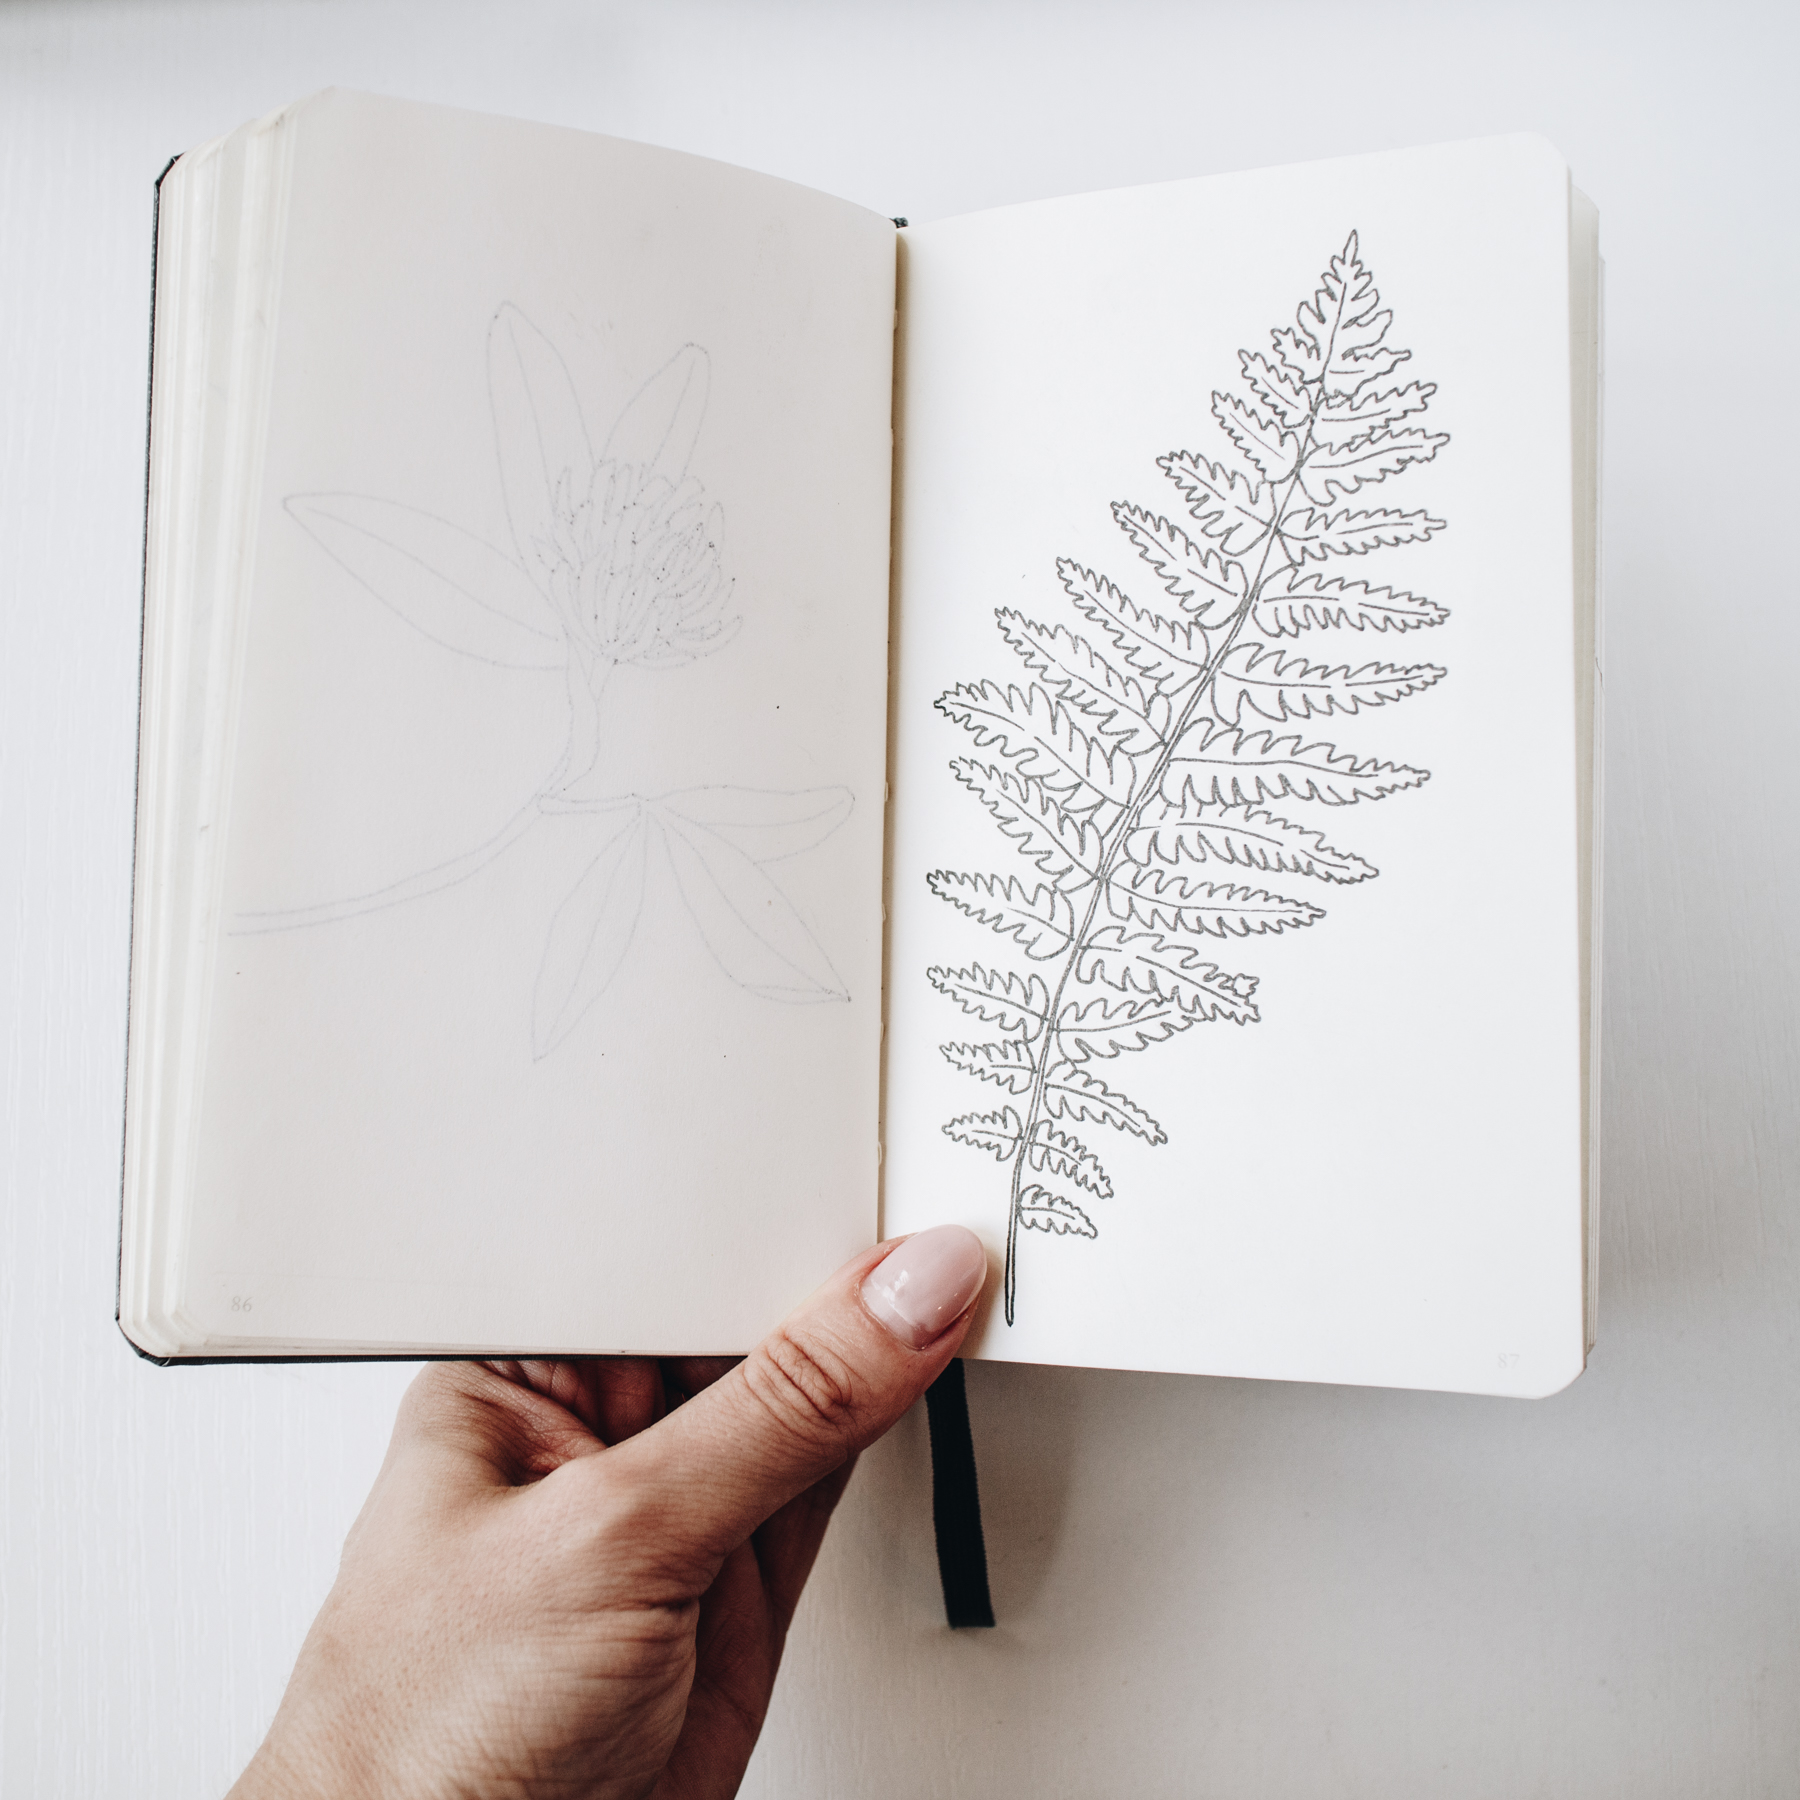 Botanical sketchbook. A note on plant drawing — Anna Farba